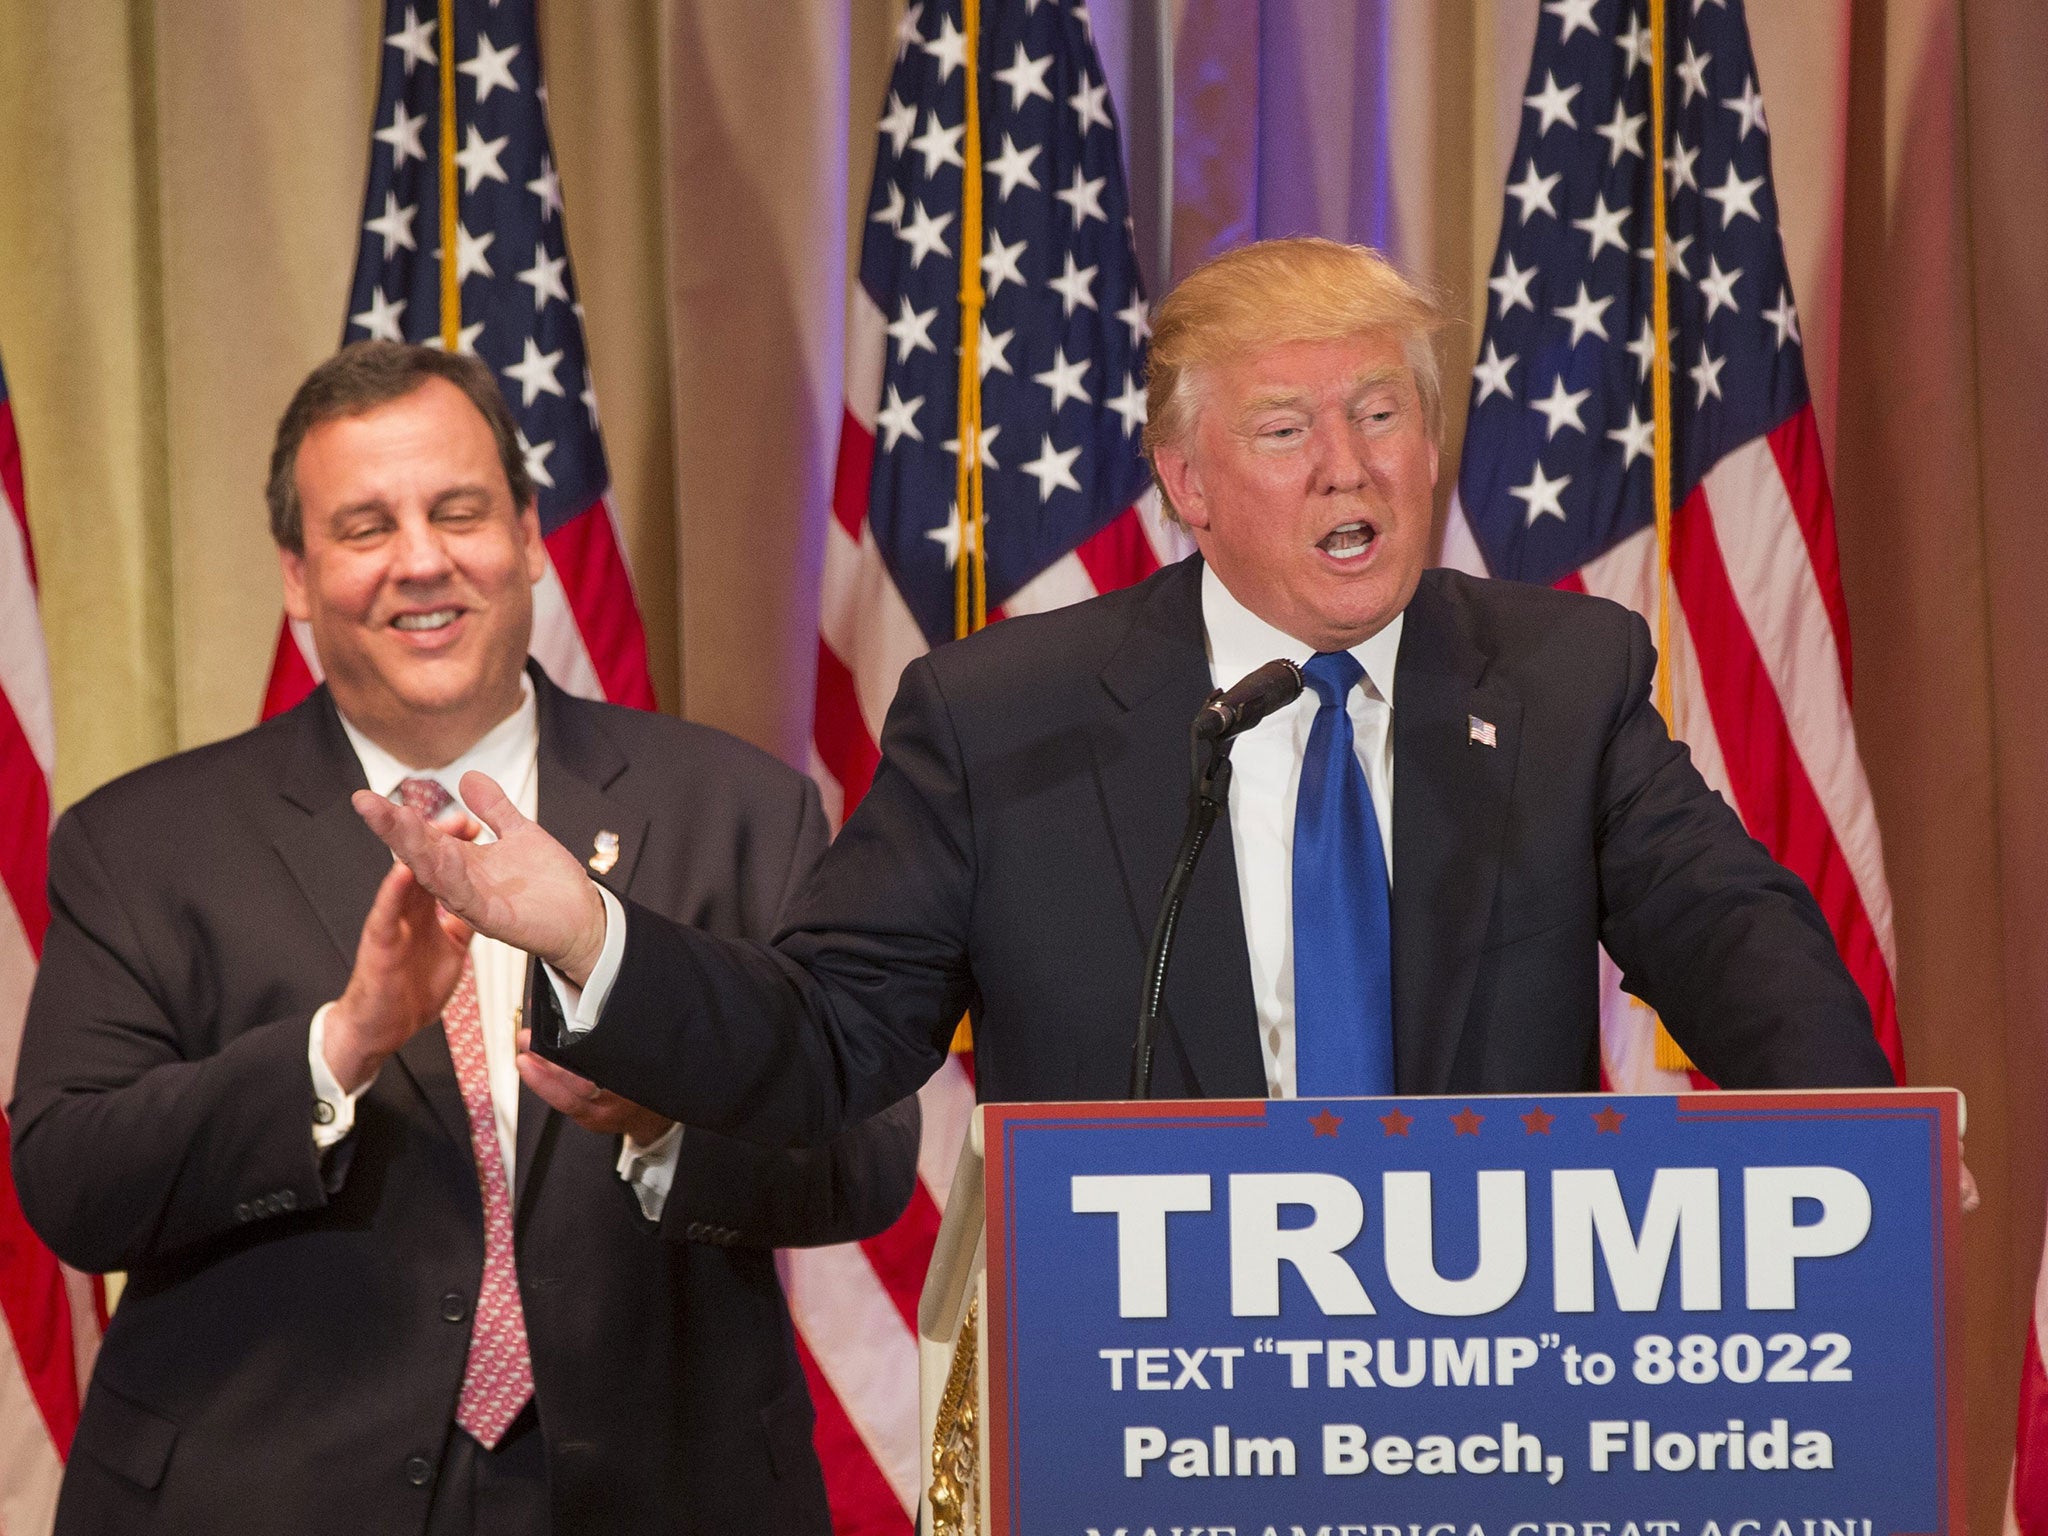 <p>Donald Trump speaks, after being introduced by New Jersey Governor Chris Christie (L), at a Super Tuesday campaign event in Palm Beach, Florida</p>